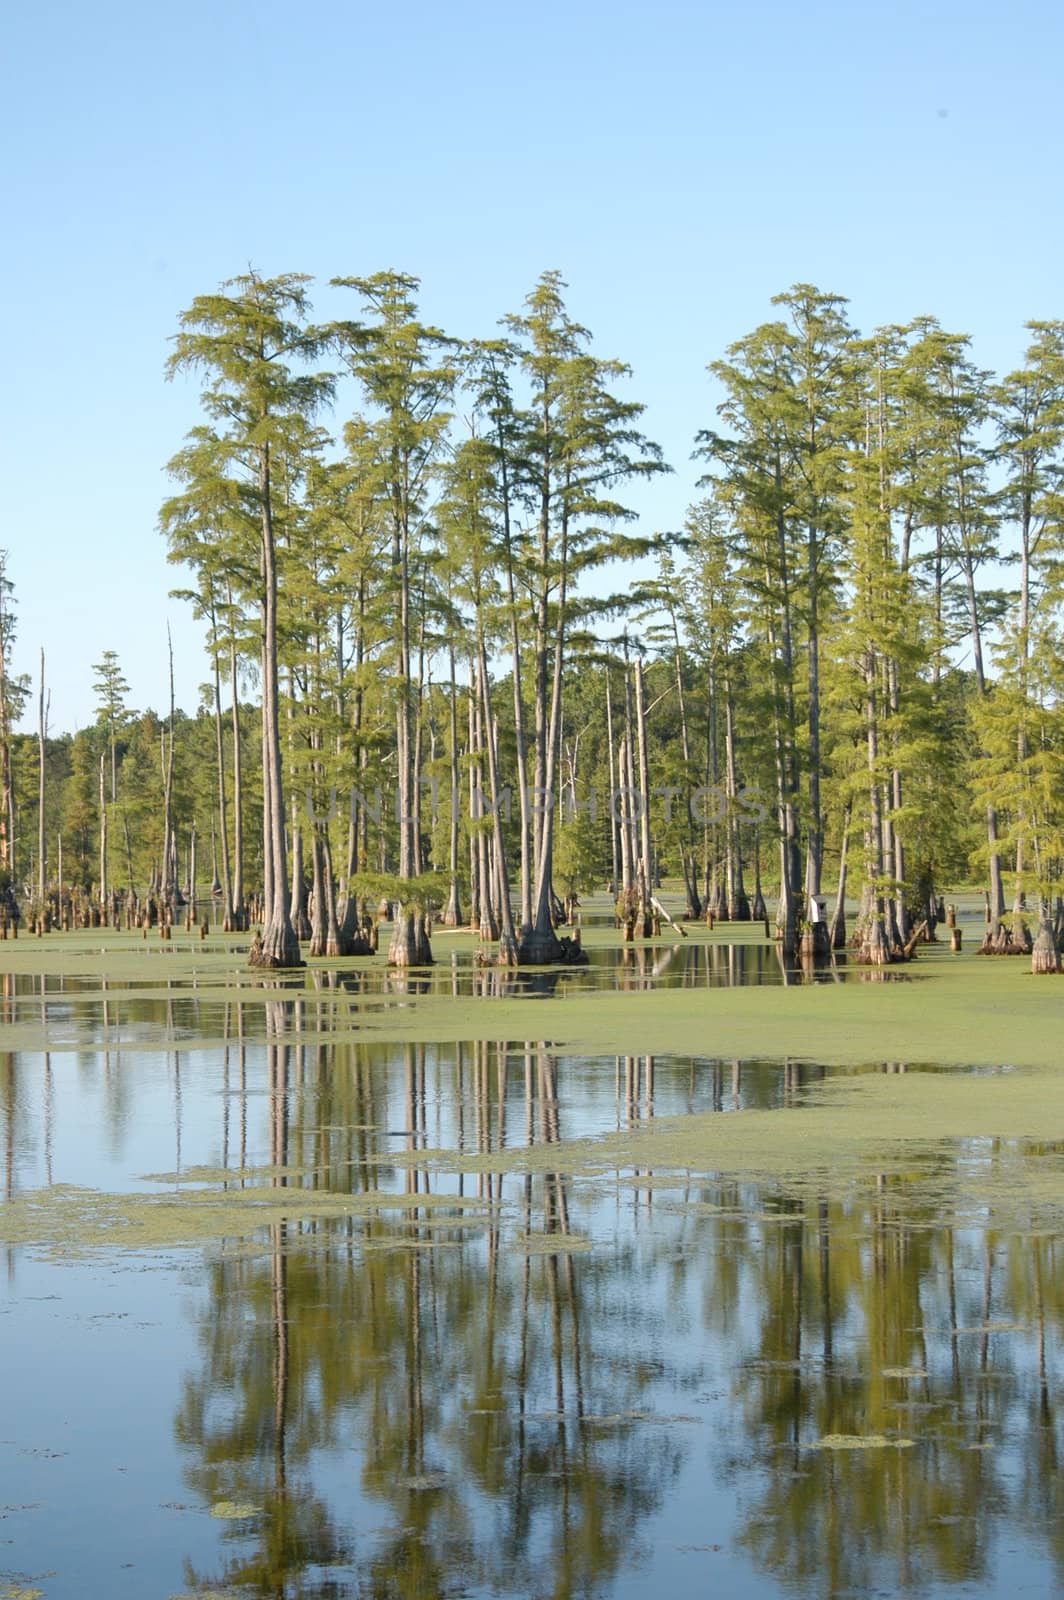  A large swamp in the southern united states